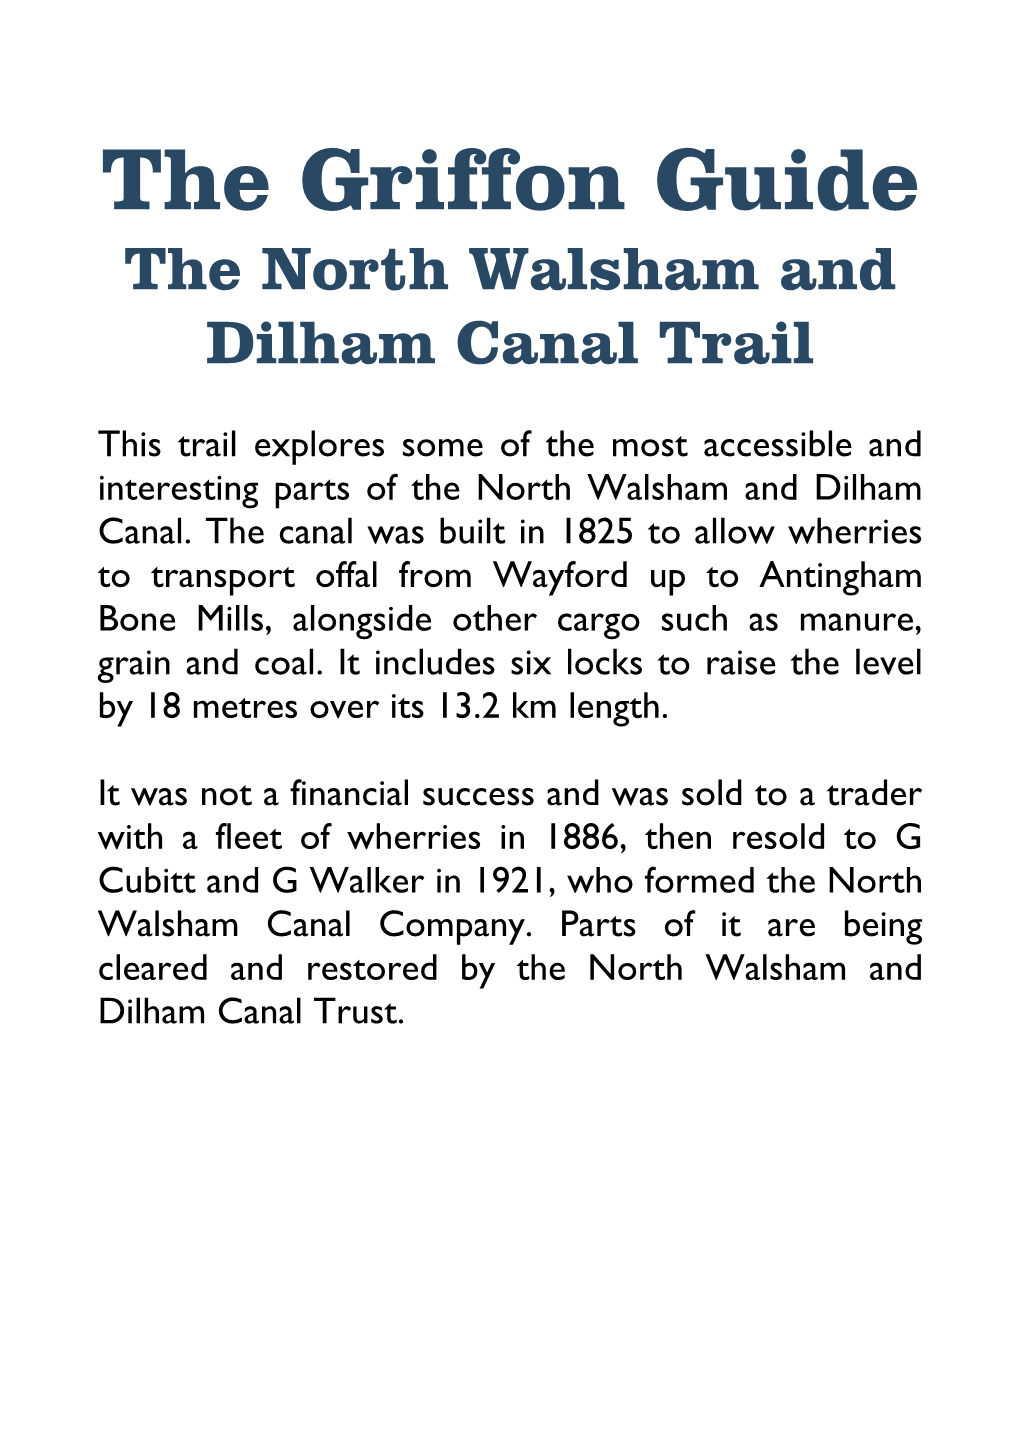 The North Walsham and Dilham Canal Trail